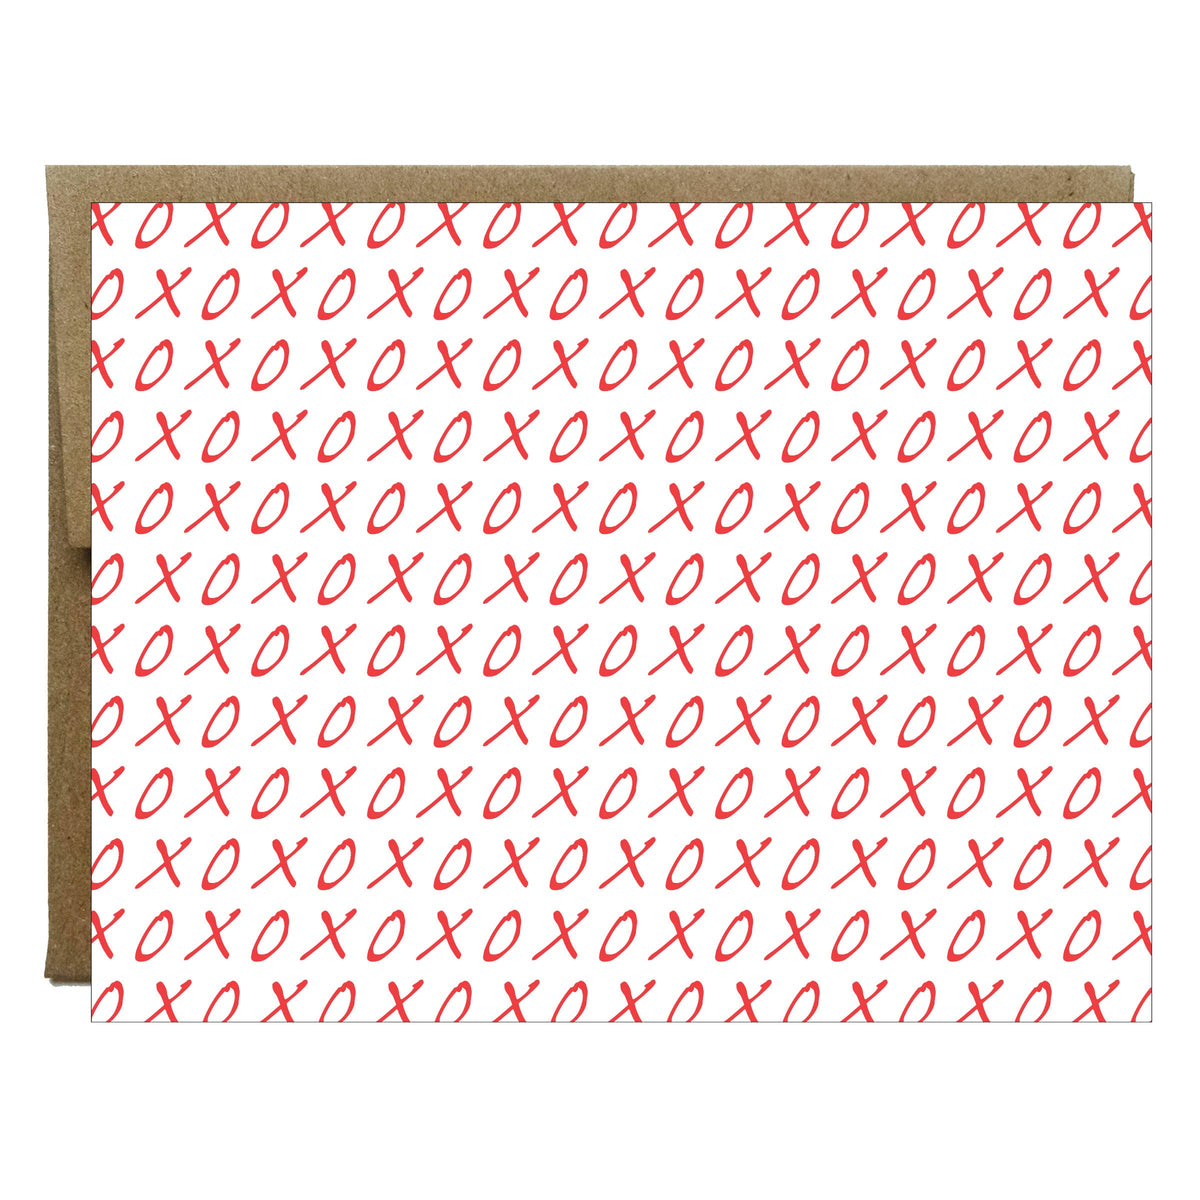 XOXO Patterned Greeting Card